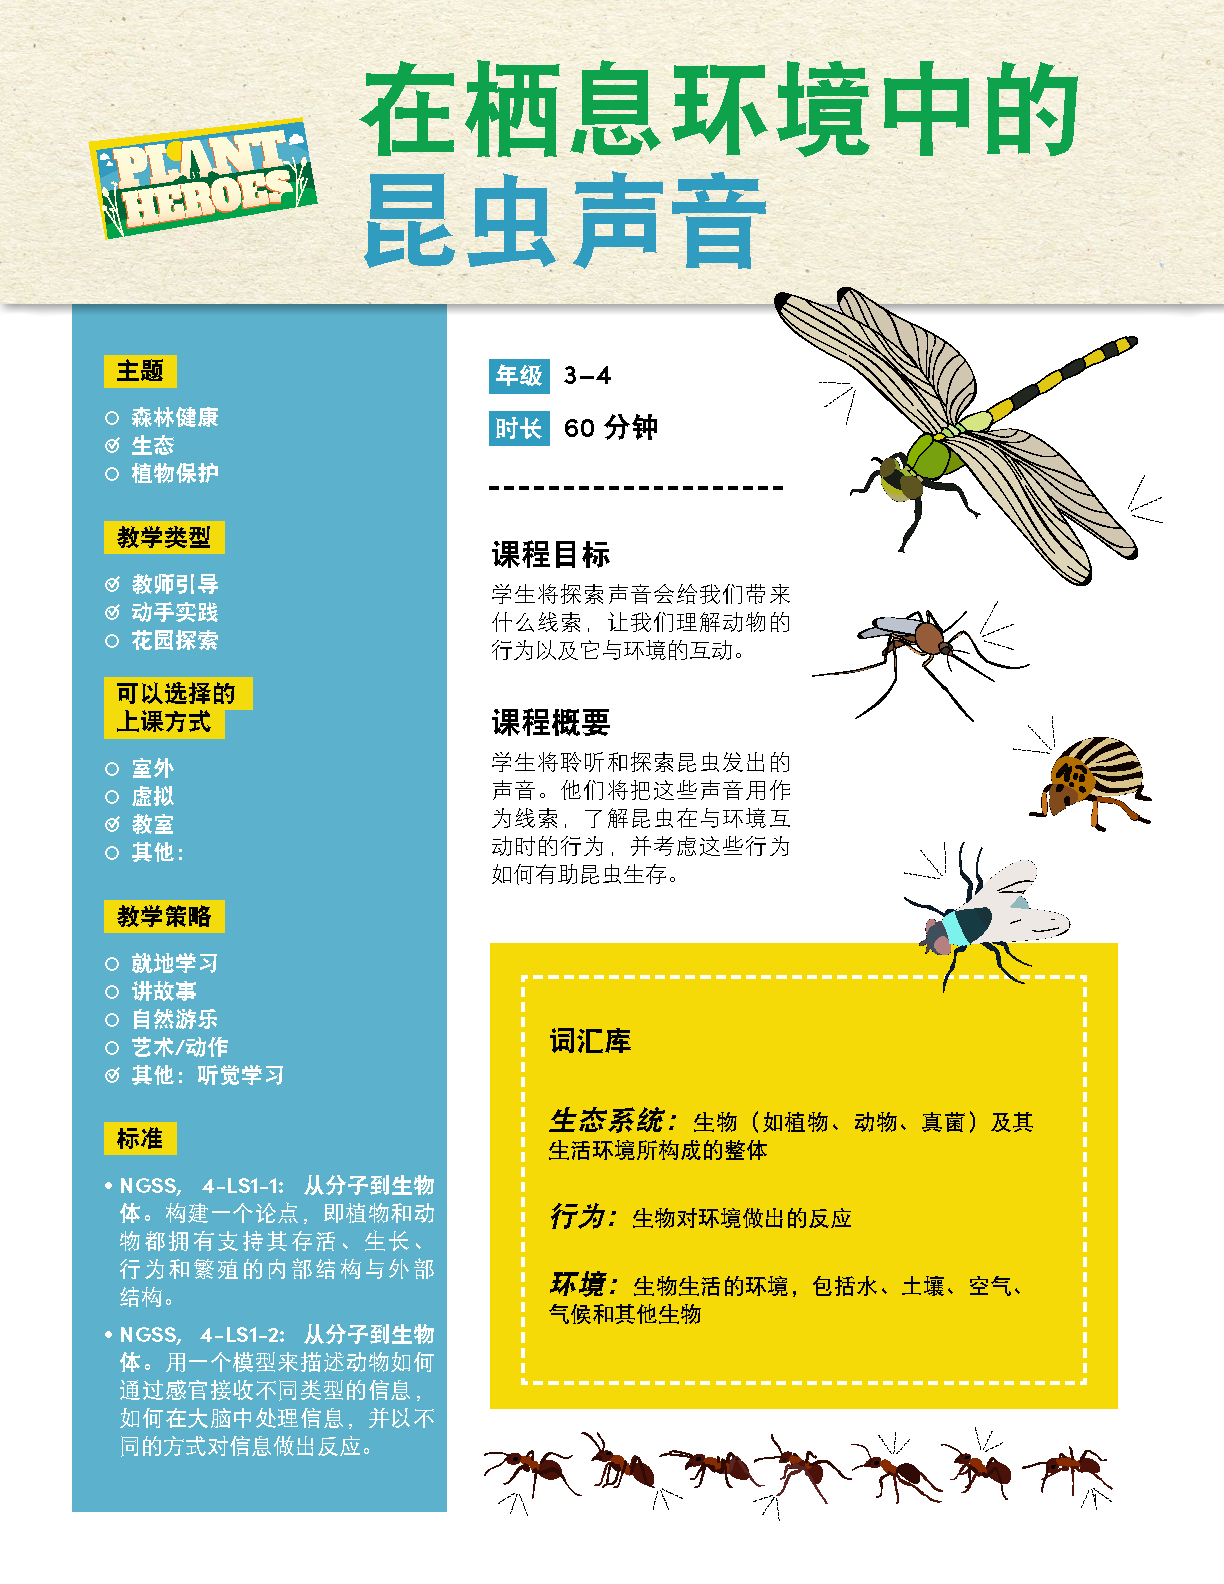 Cover image of the insect sounds lesson plan in Chinese with dragonfly images on the cover